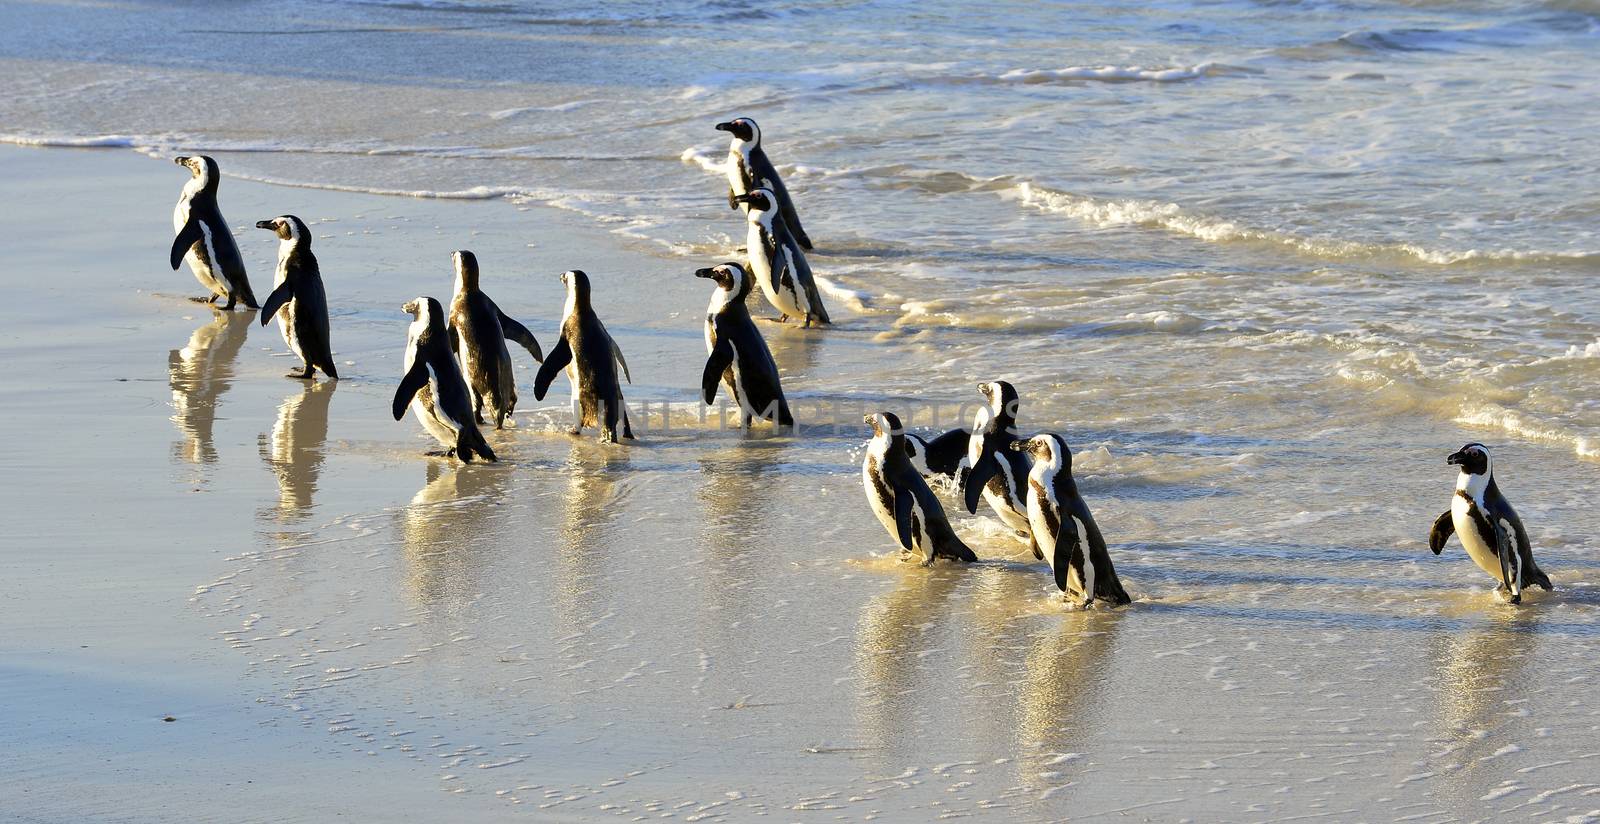  African penguins by SURZ